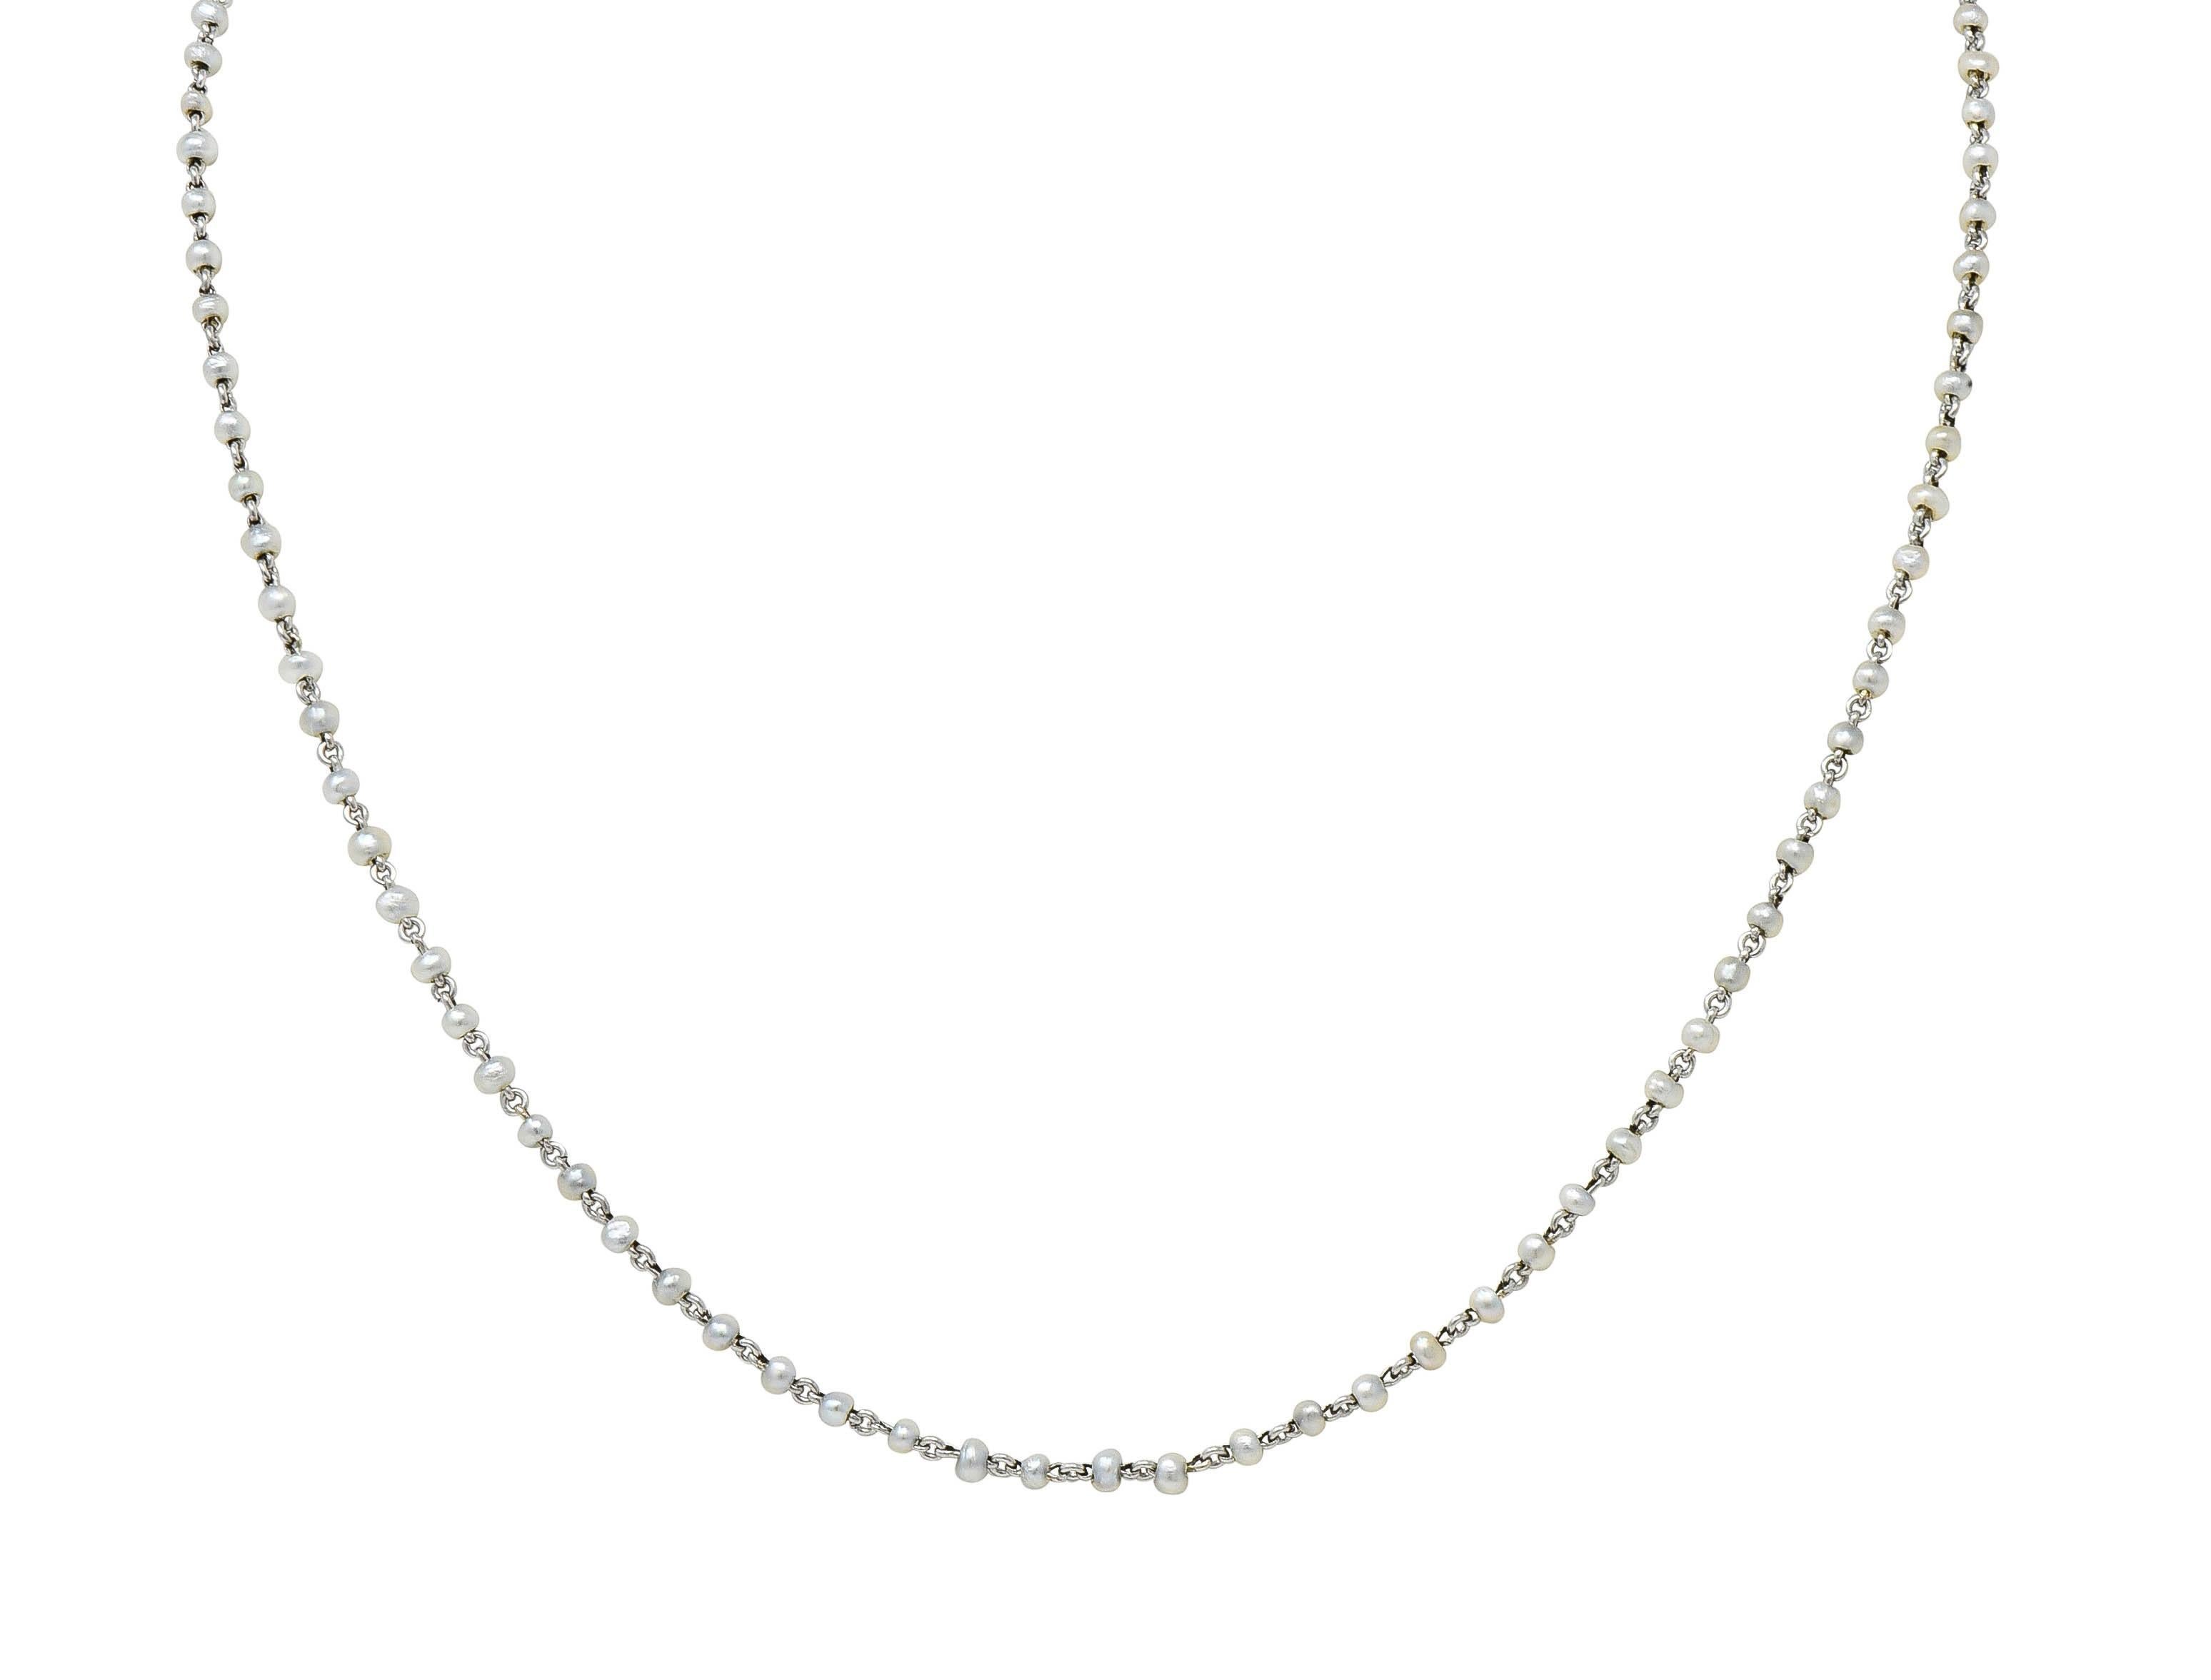 Edwardian Pearl Platinum Beaded Antique Chain Necklace 3